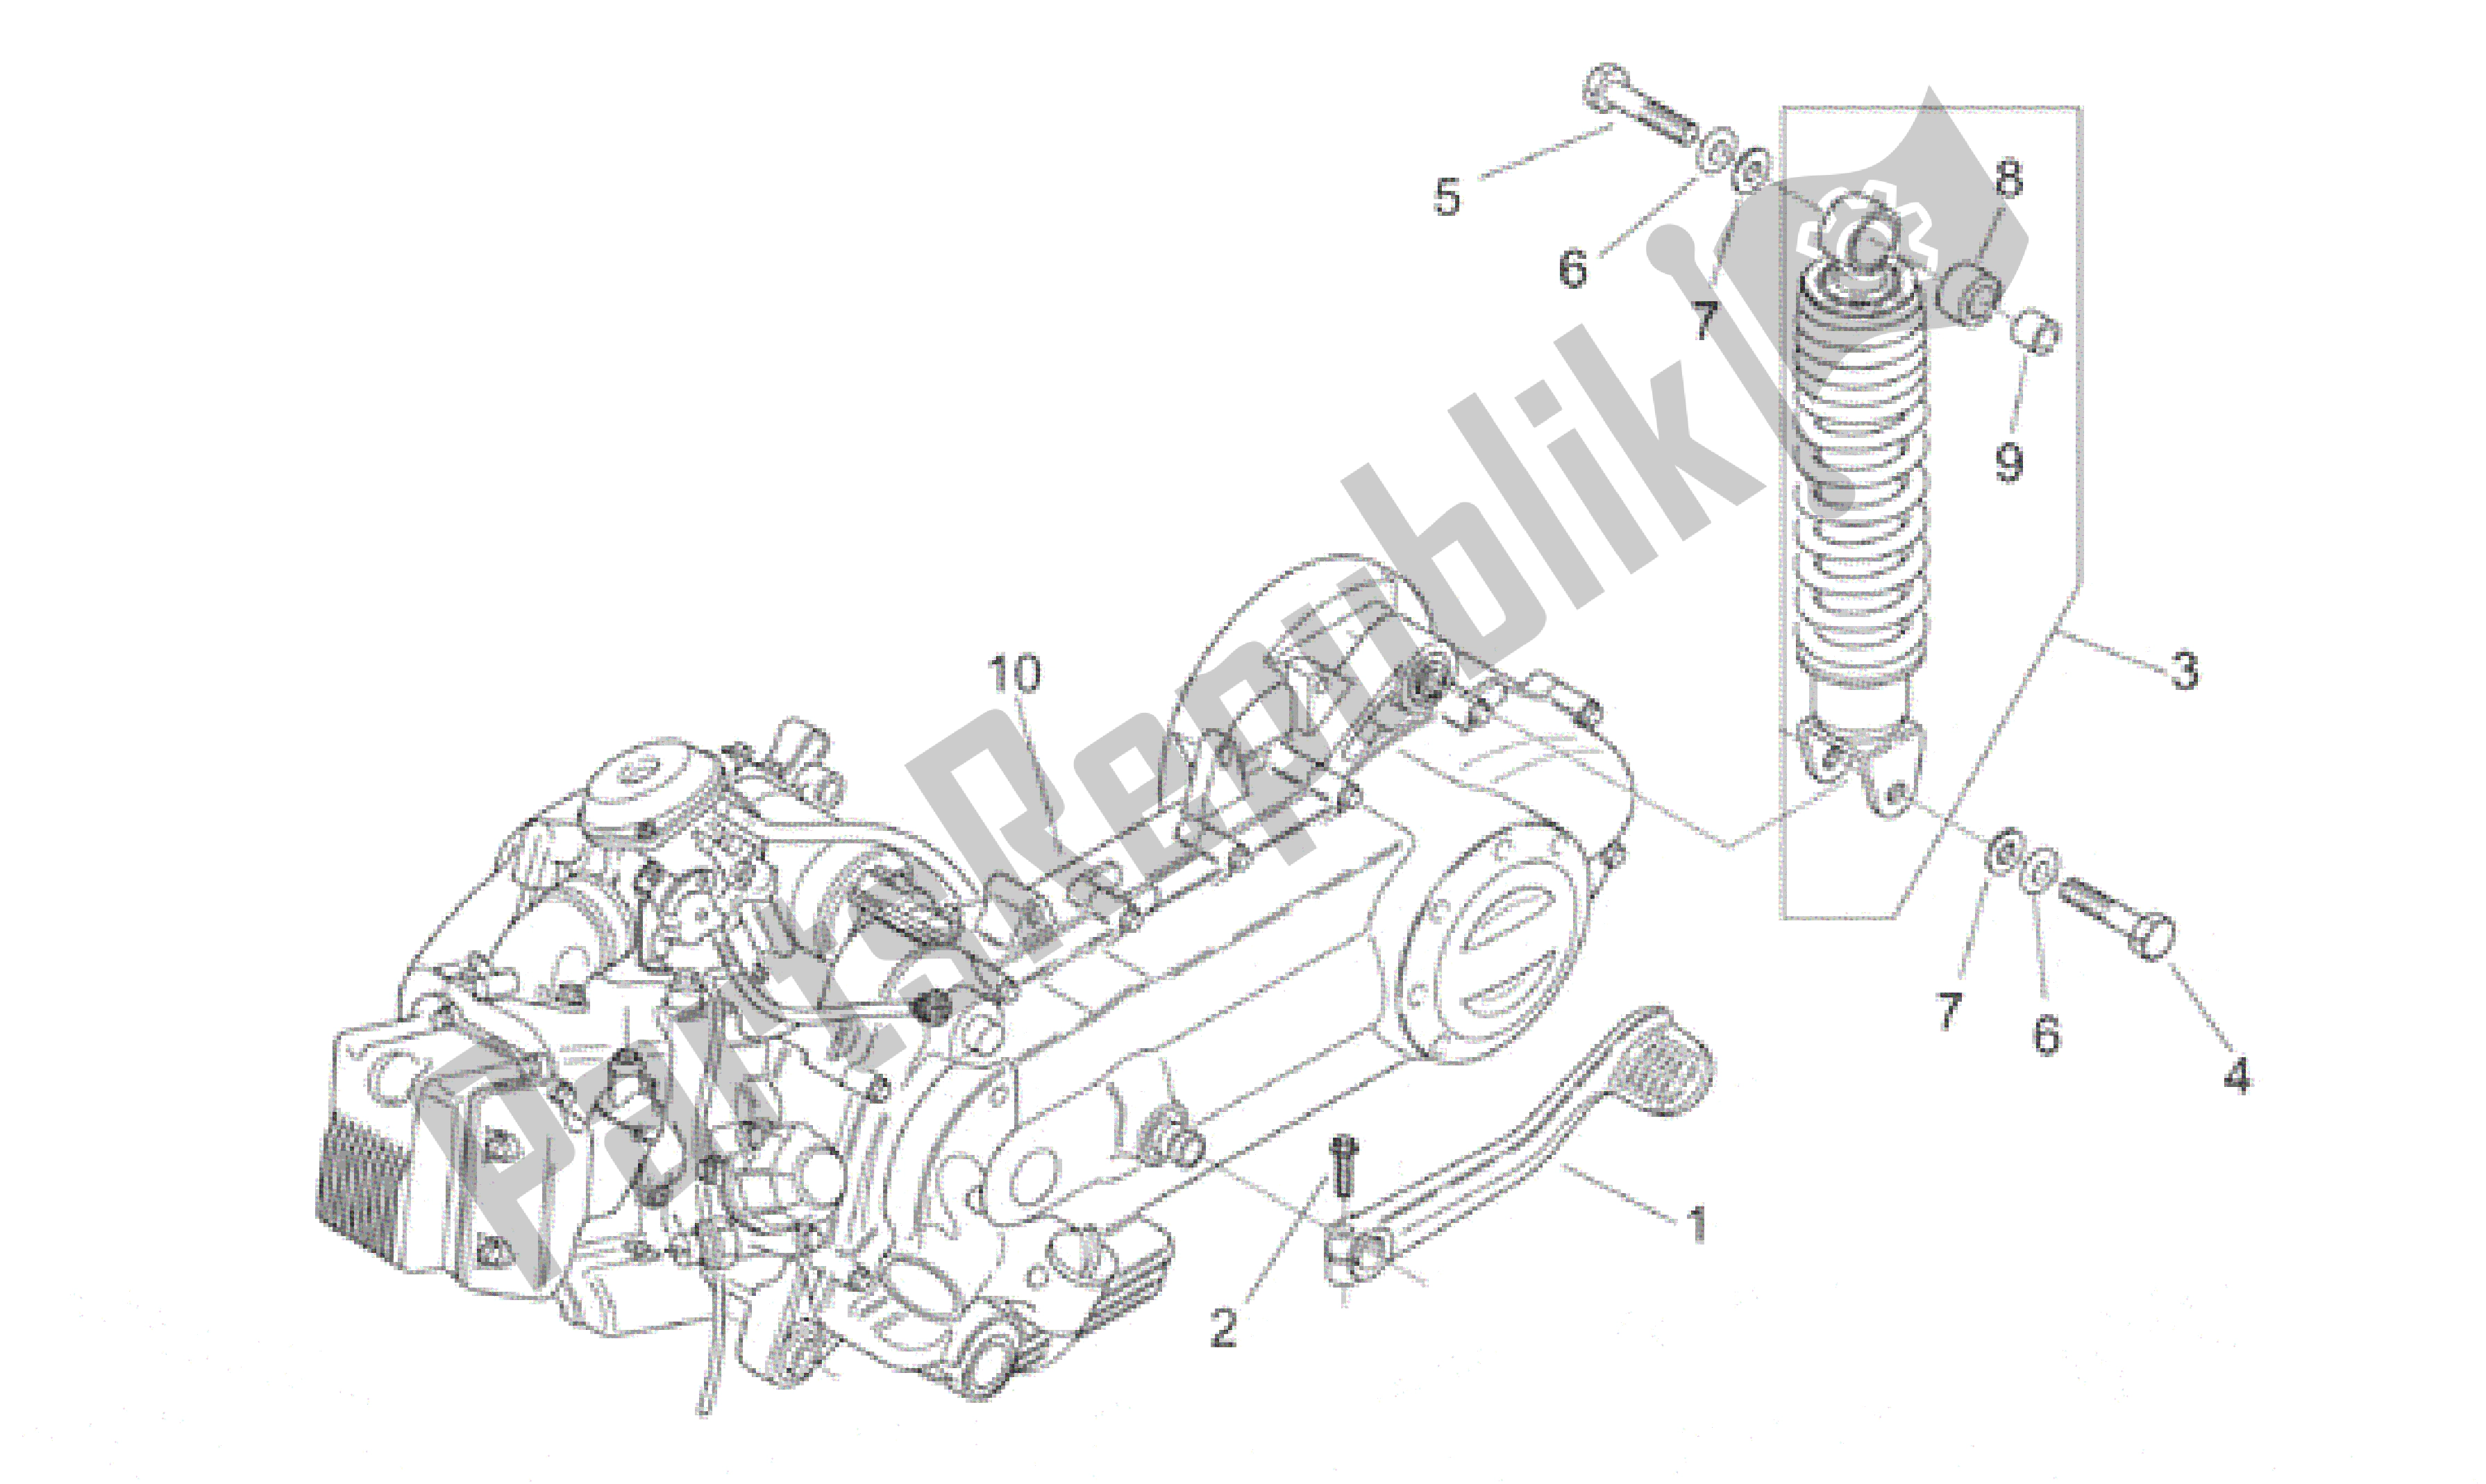 All parts for the Engine - Rear Shock Absorber of the Aprilia Habana 125 1999 - 2001